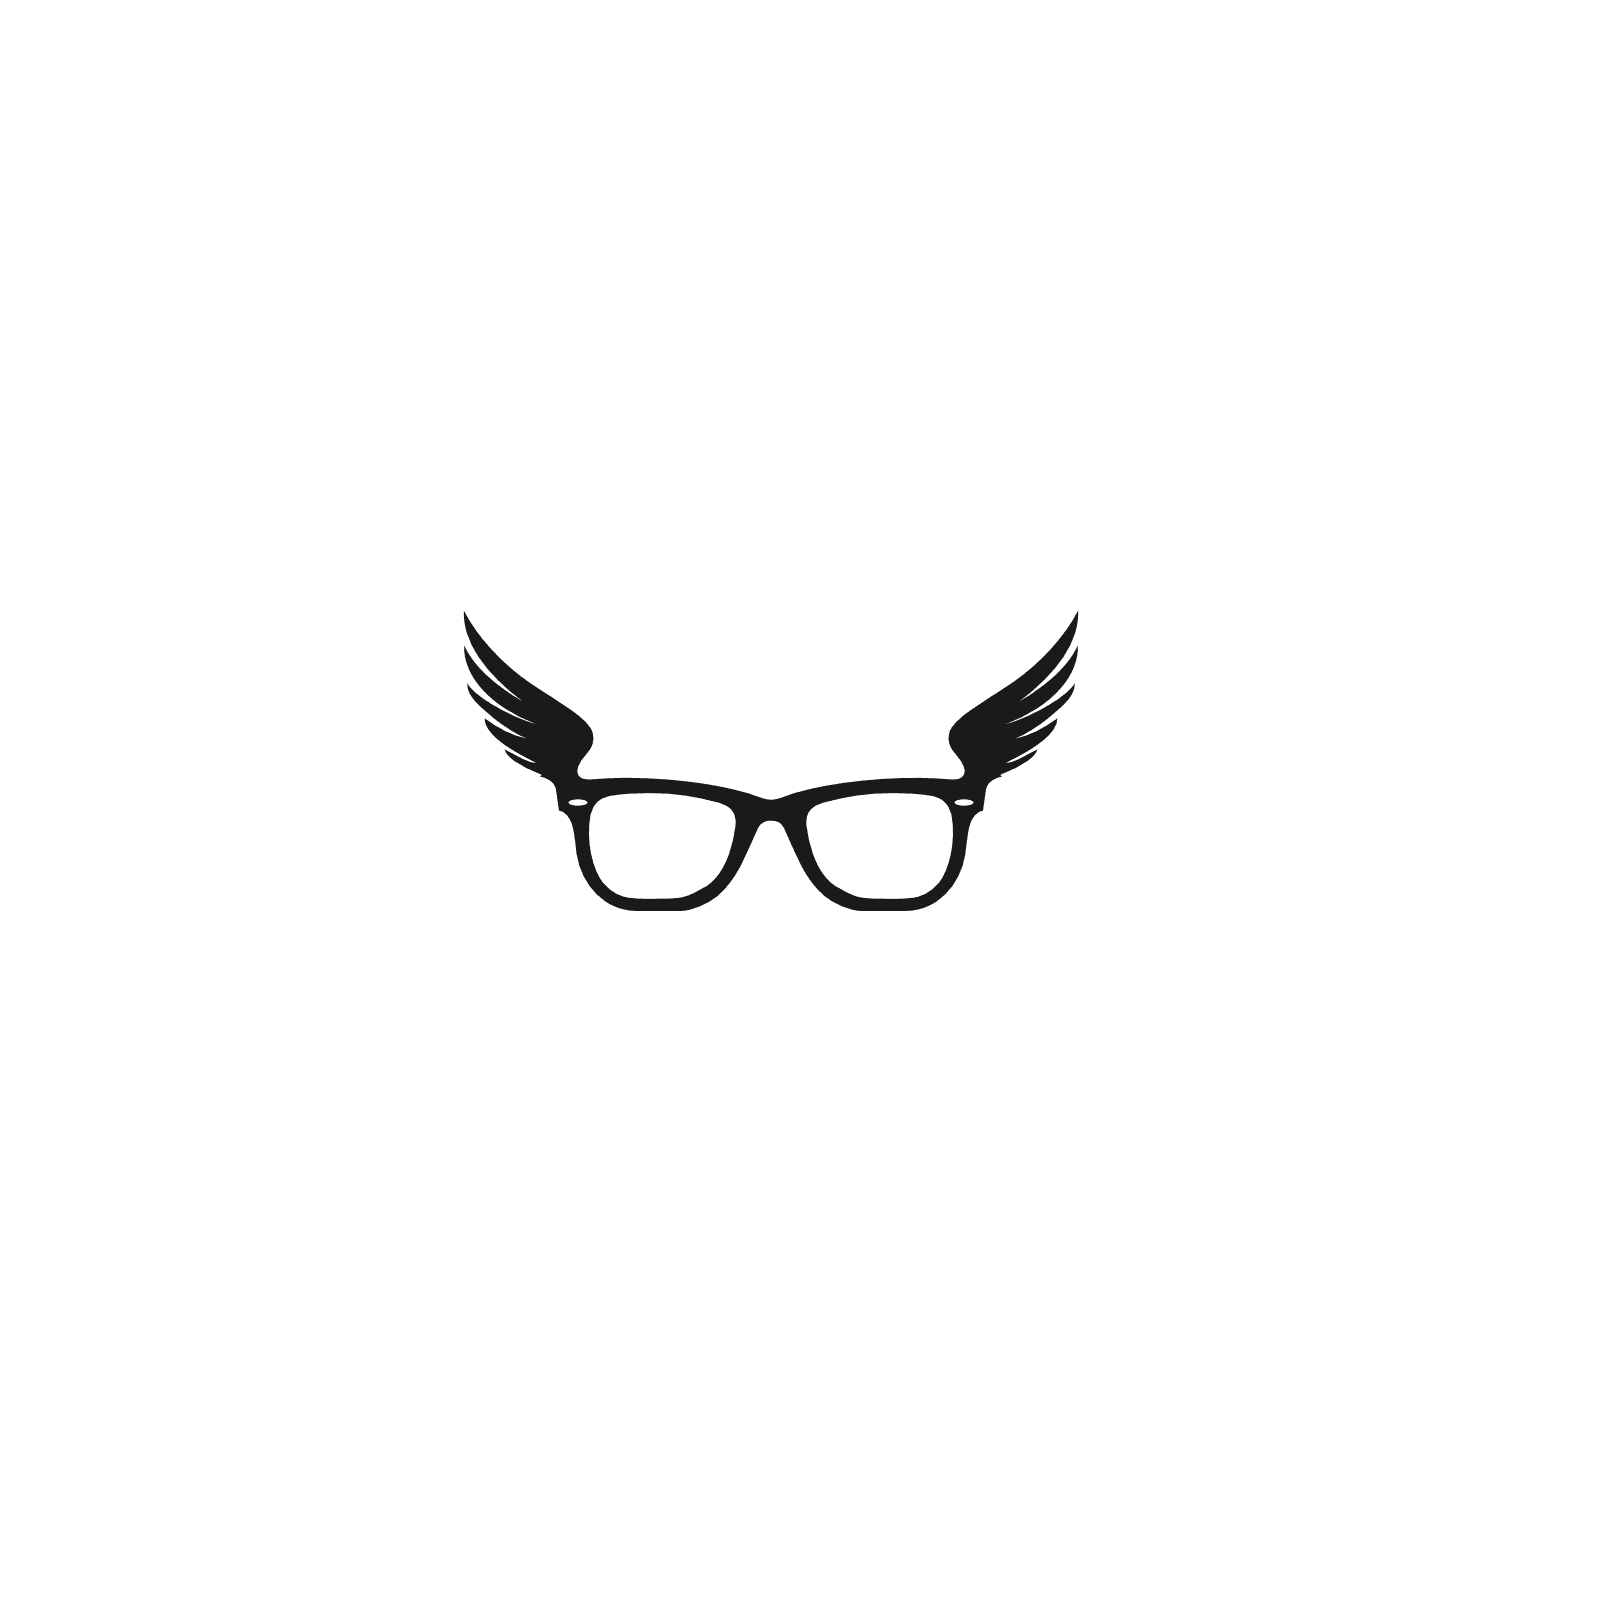 eyeglasses-with-wings-free-svg-file-SvgHeart.Com